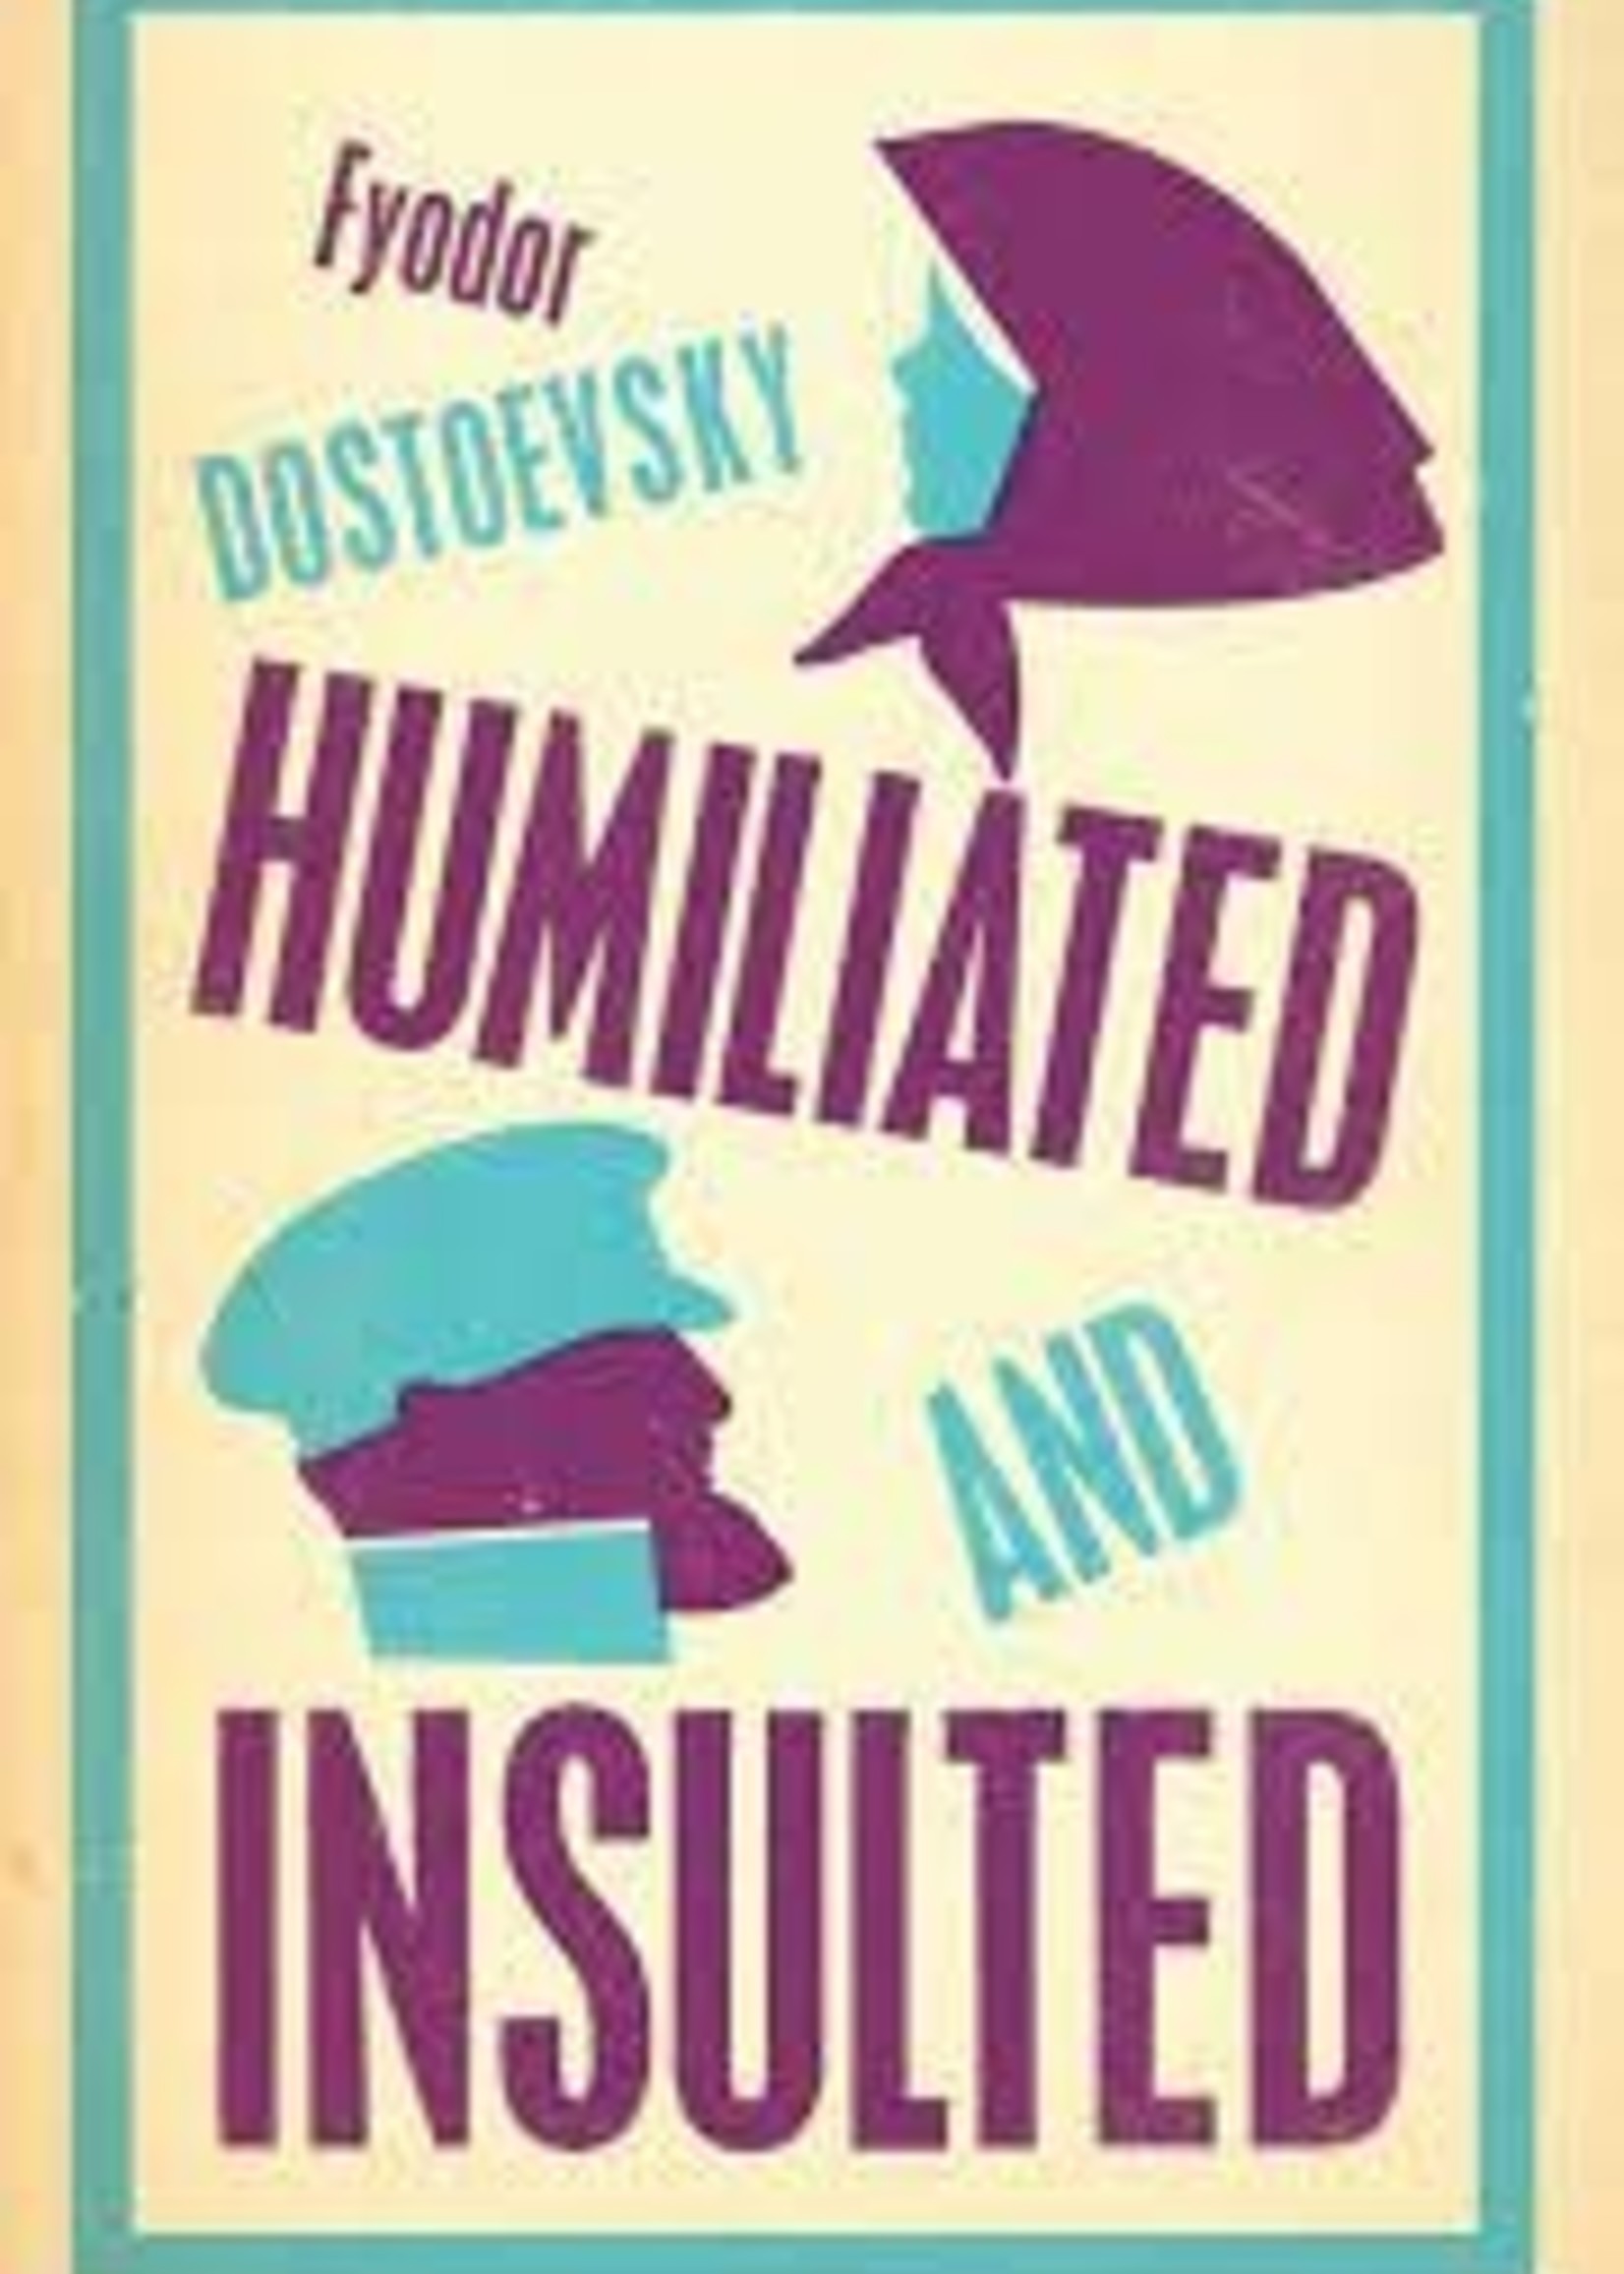 Humiliated and Insulted by Fyodor Dostoevsky